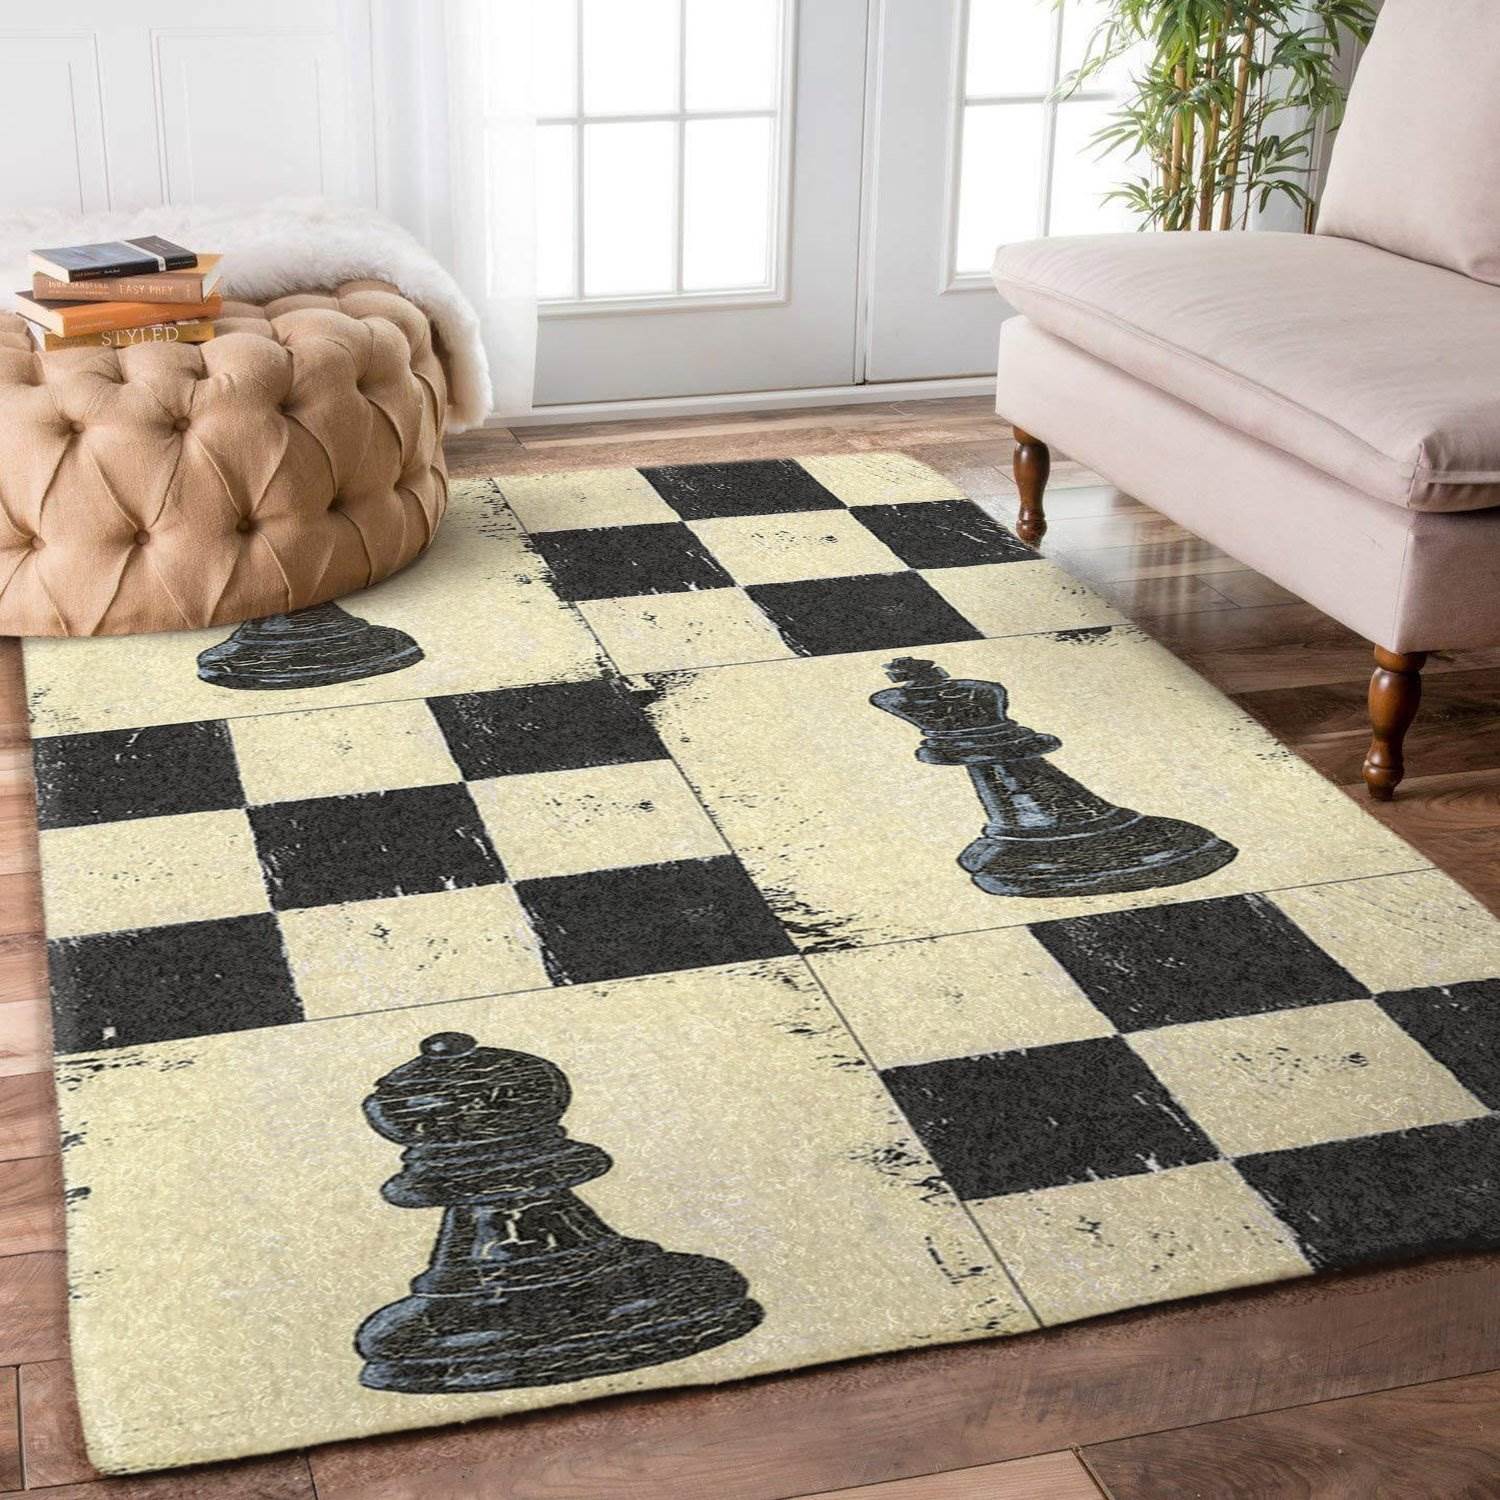 Chess Limited Edition Rug